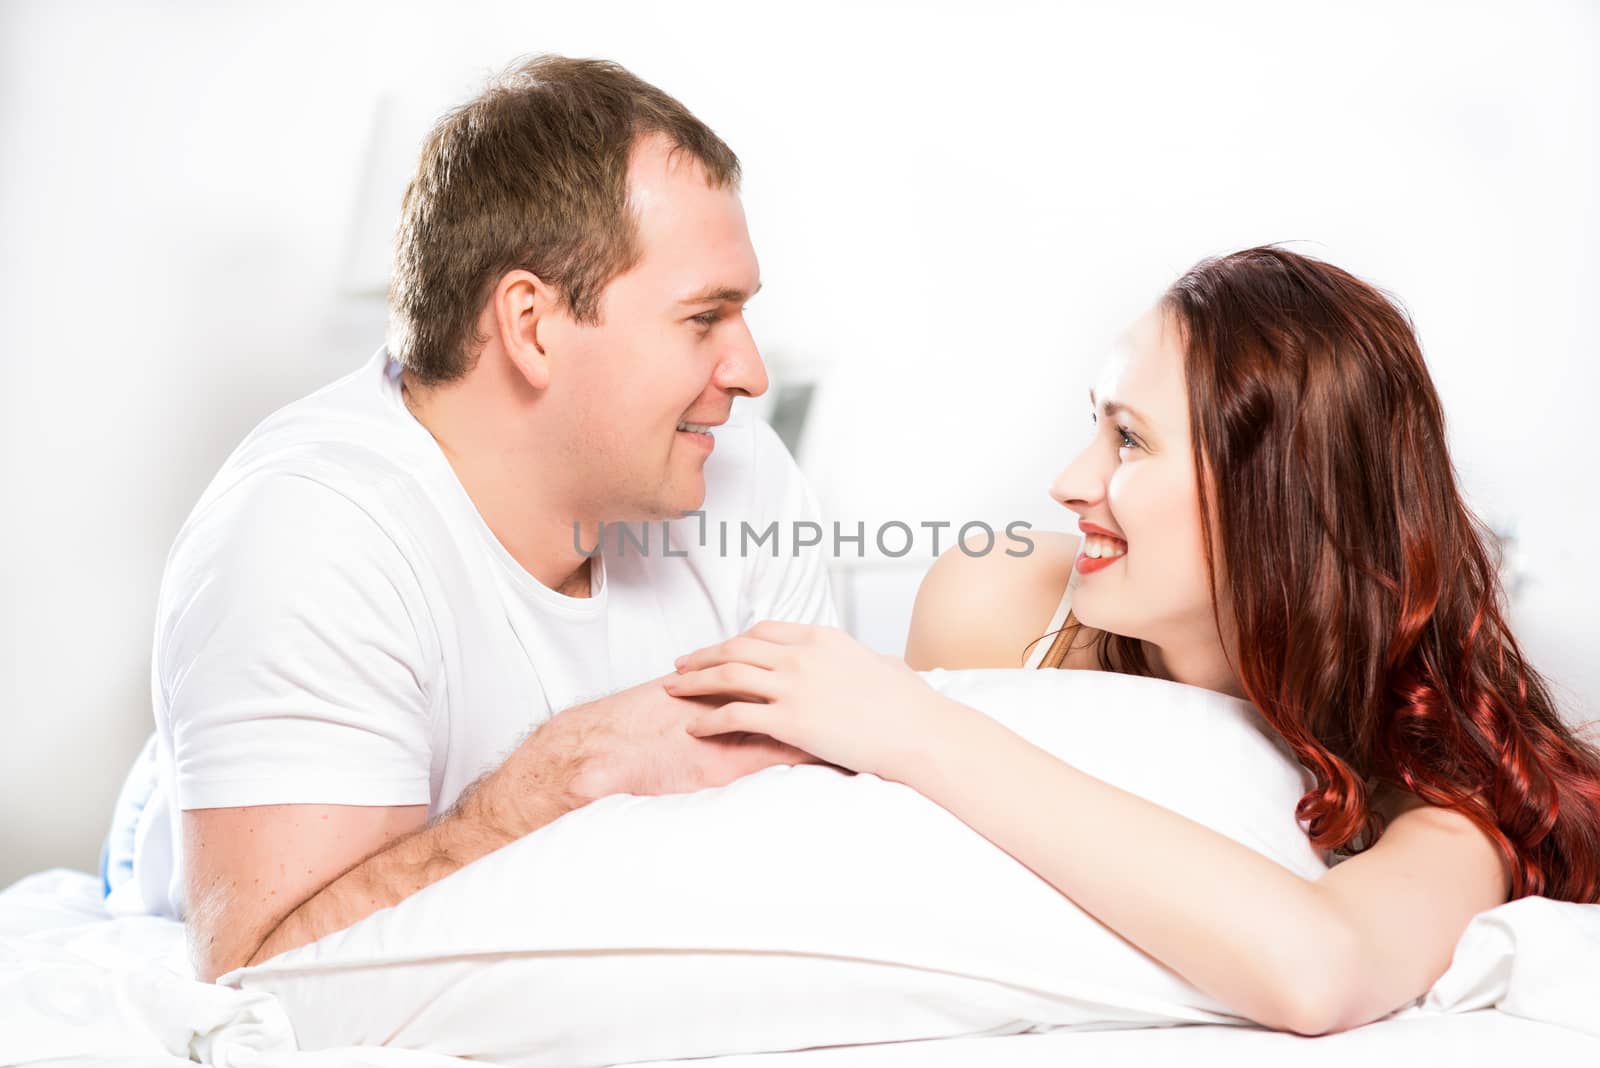 Young man and woman lying together in bed, smiling and happy